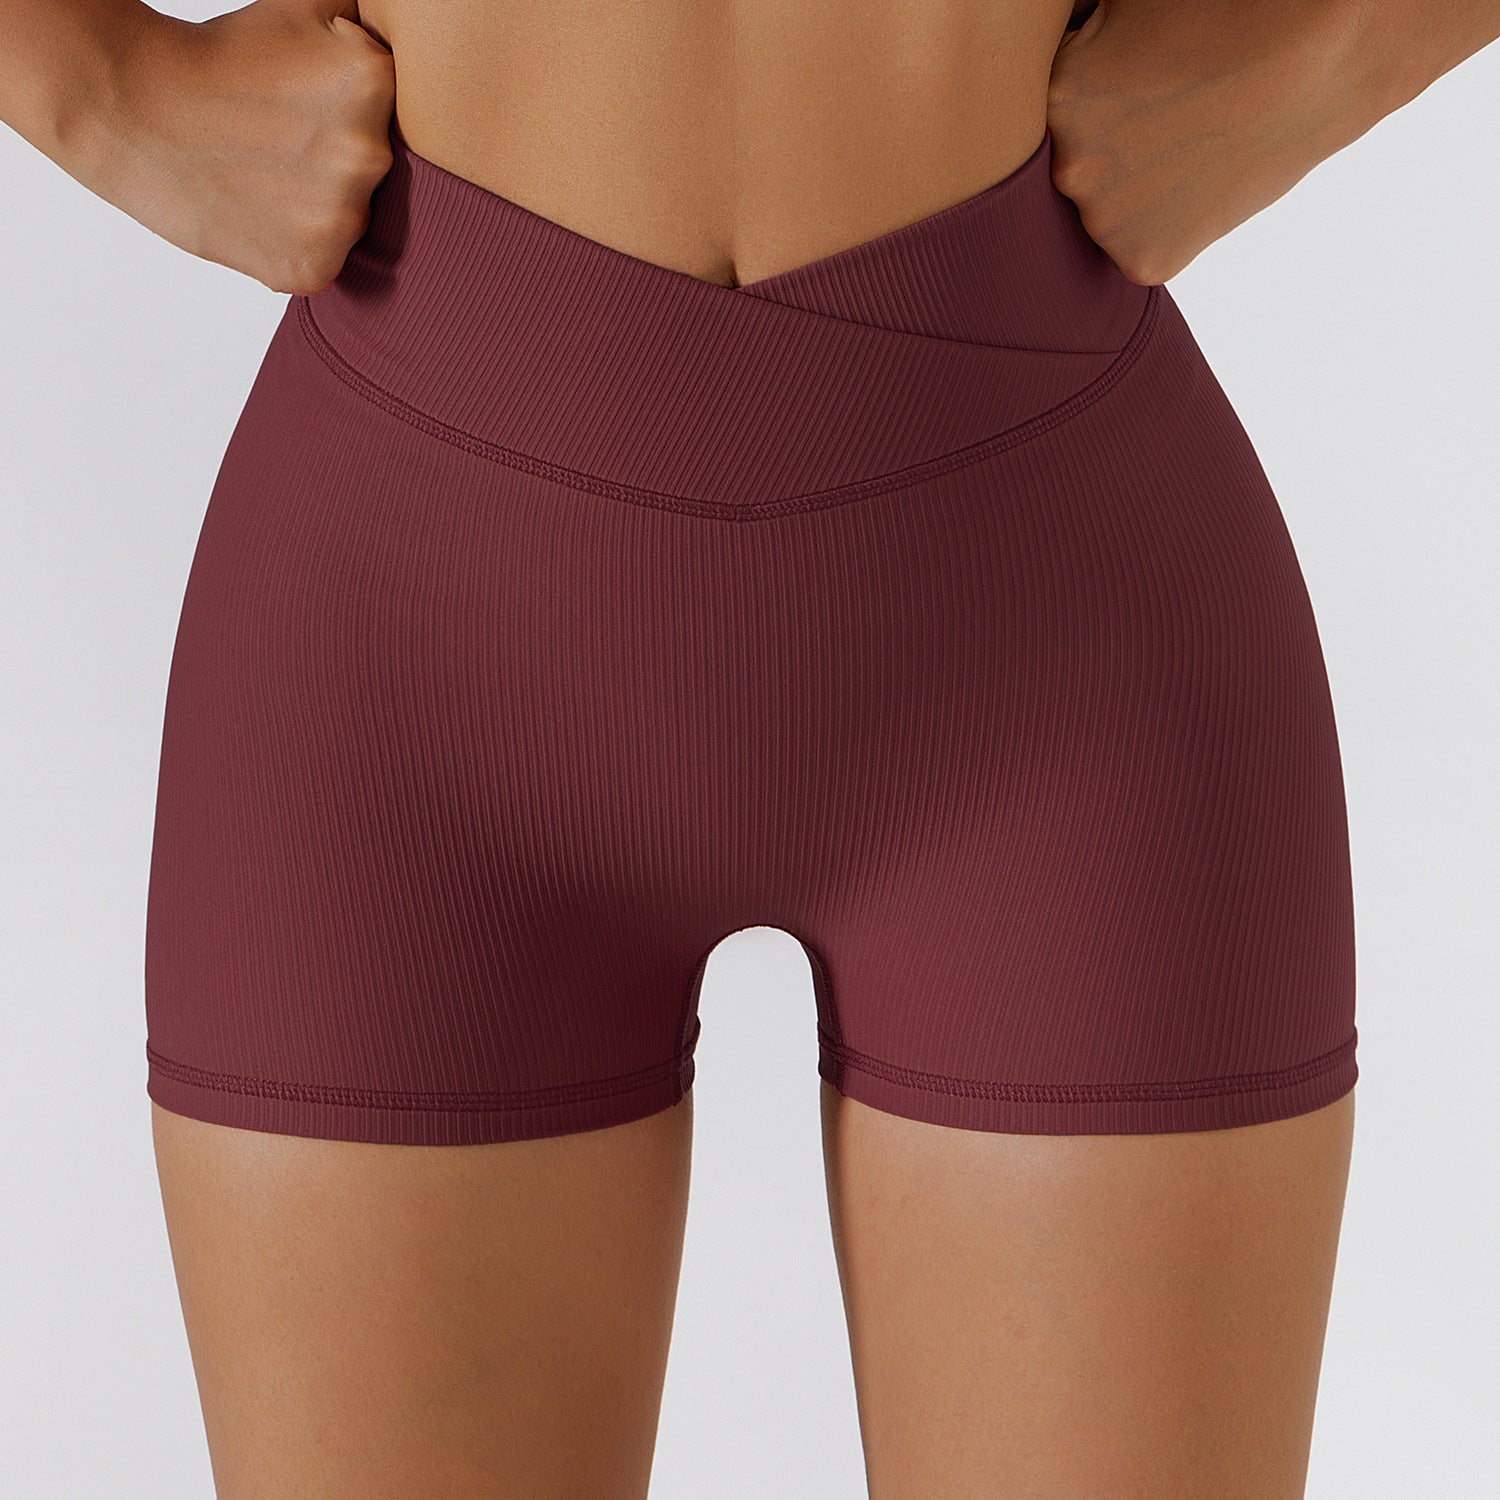 New Anti-Glare Yoga Shorts Stretch Running Fitness Shorts Sports Tights Breathable Quick-Drying Shorts